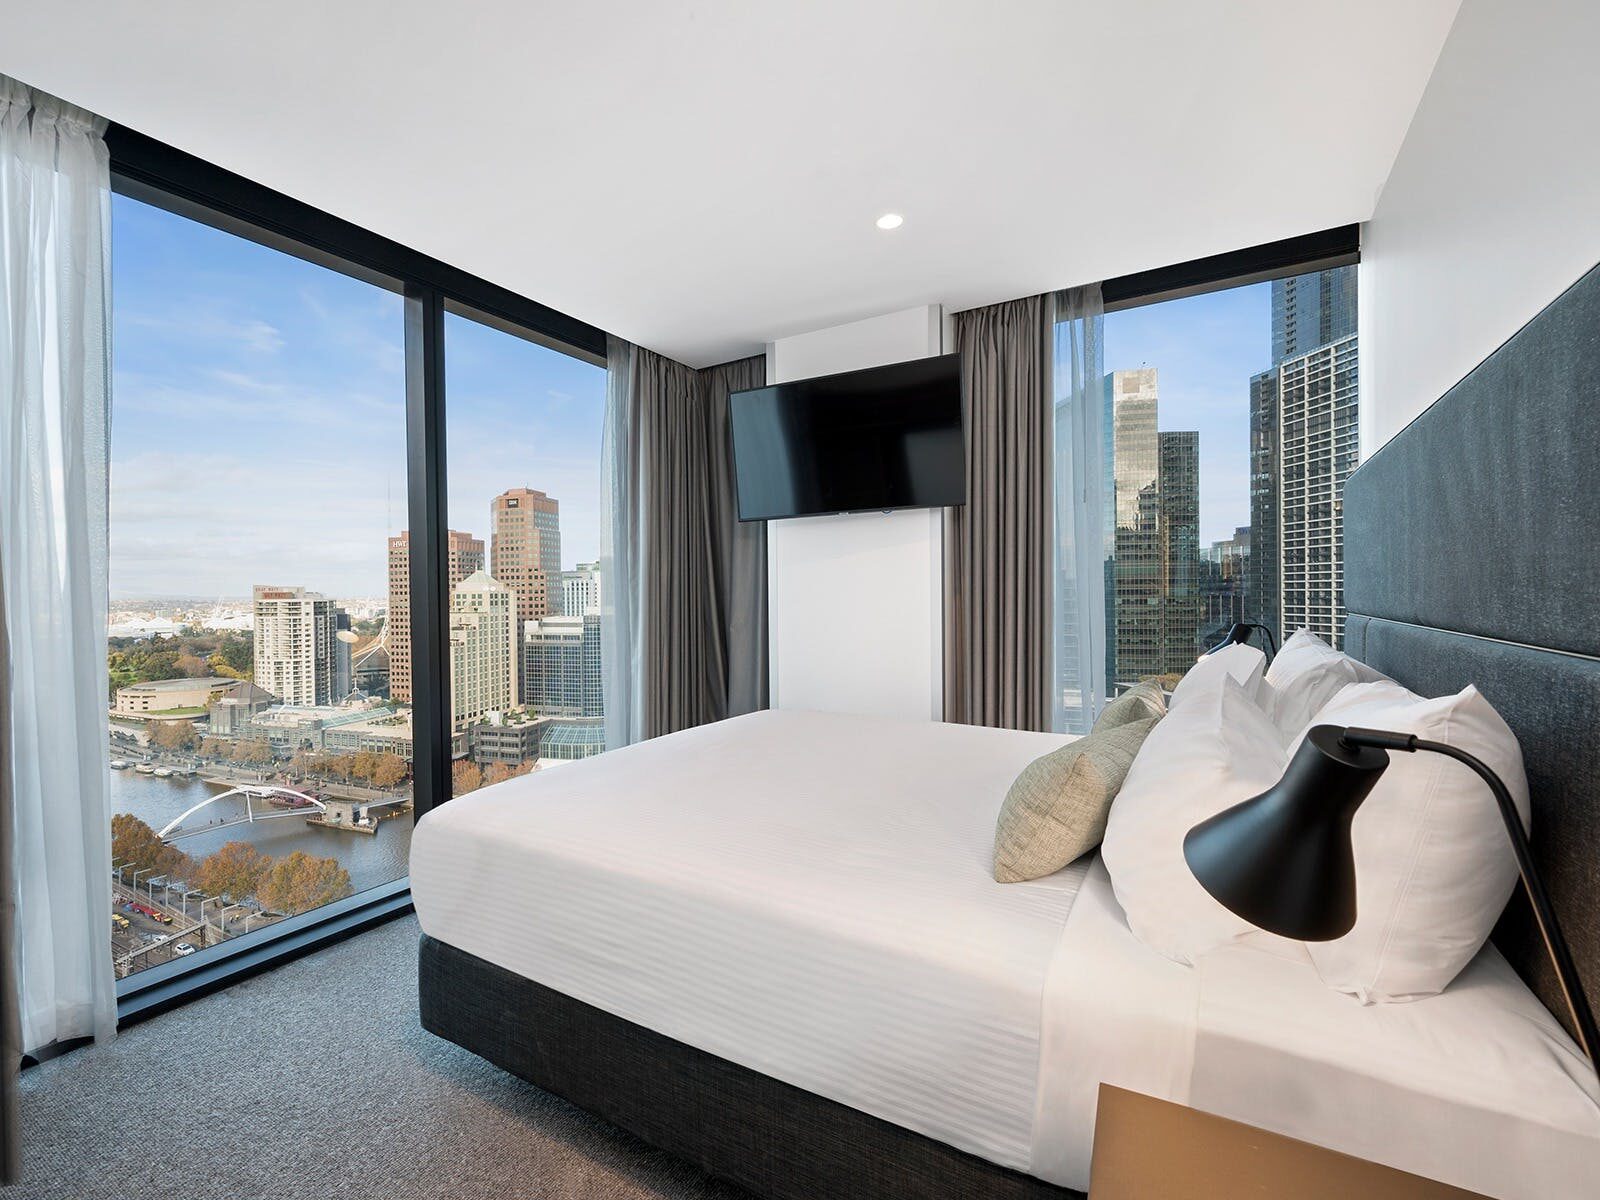 Vibe Hotel Melbourne room with floor to ceiling windows looking out to the city